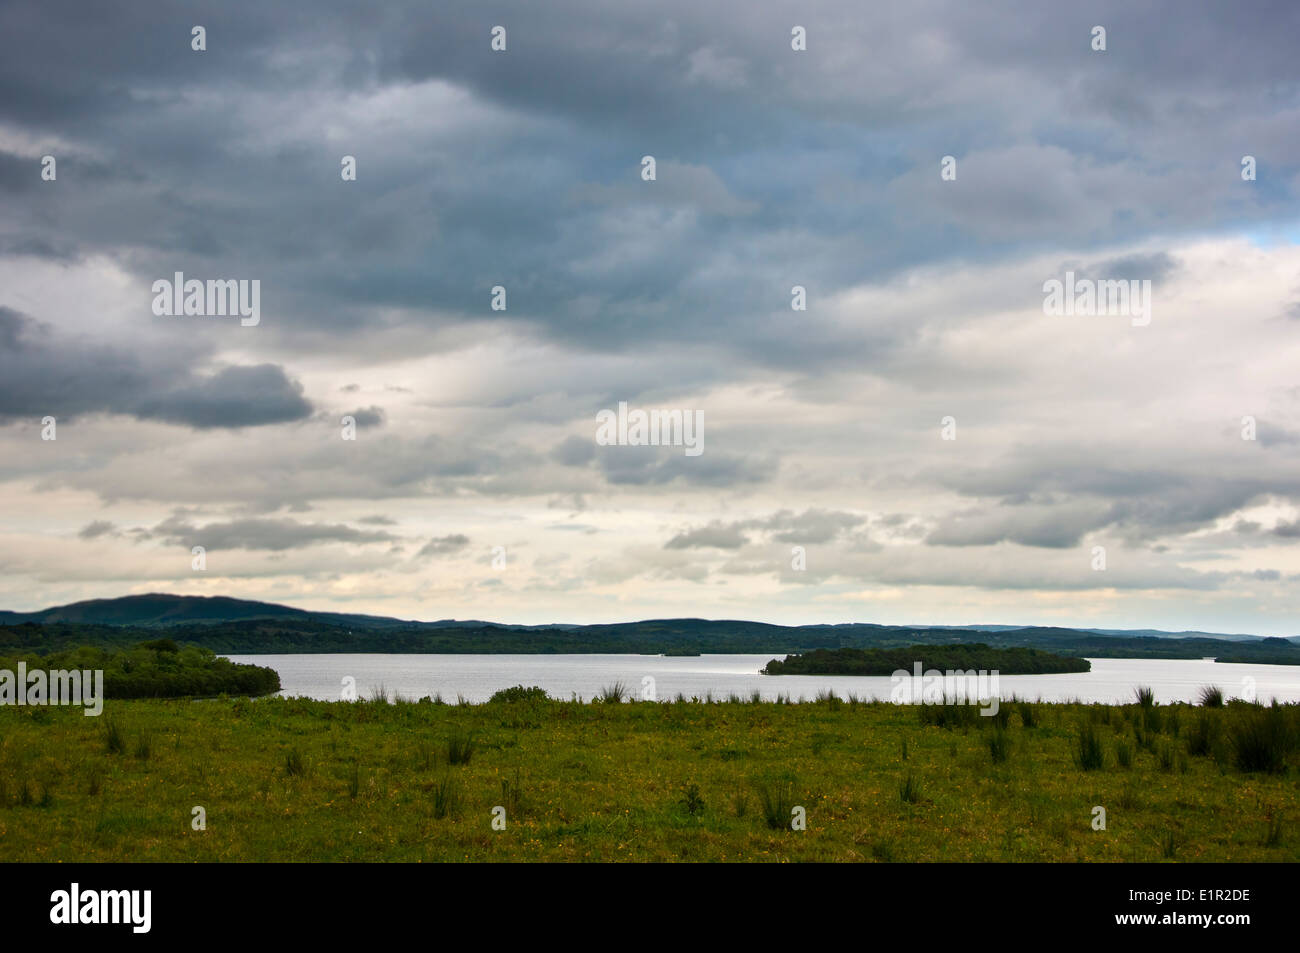 Leggs Lower Lough Erne County Fermanagh Northern Ireland Stock Photo